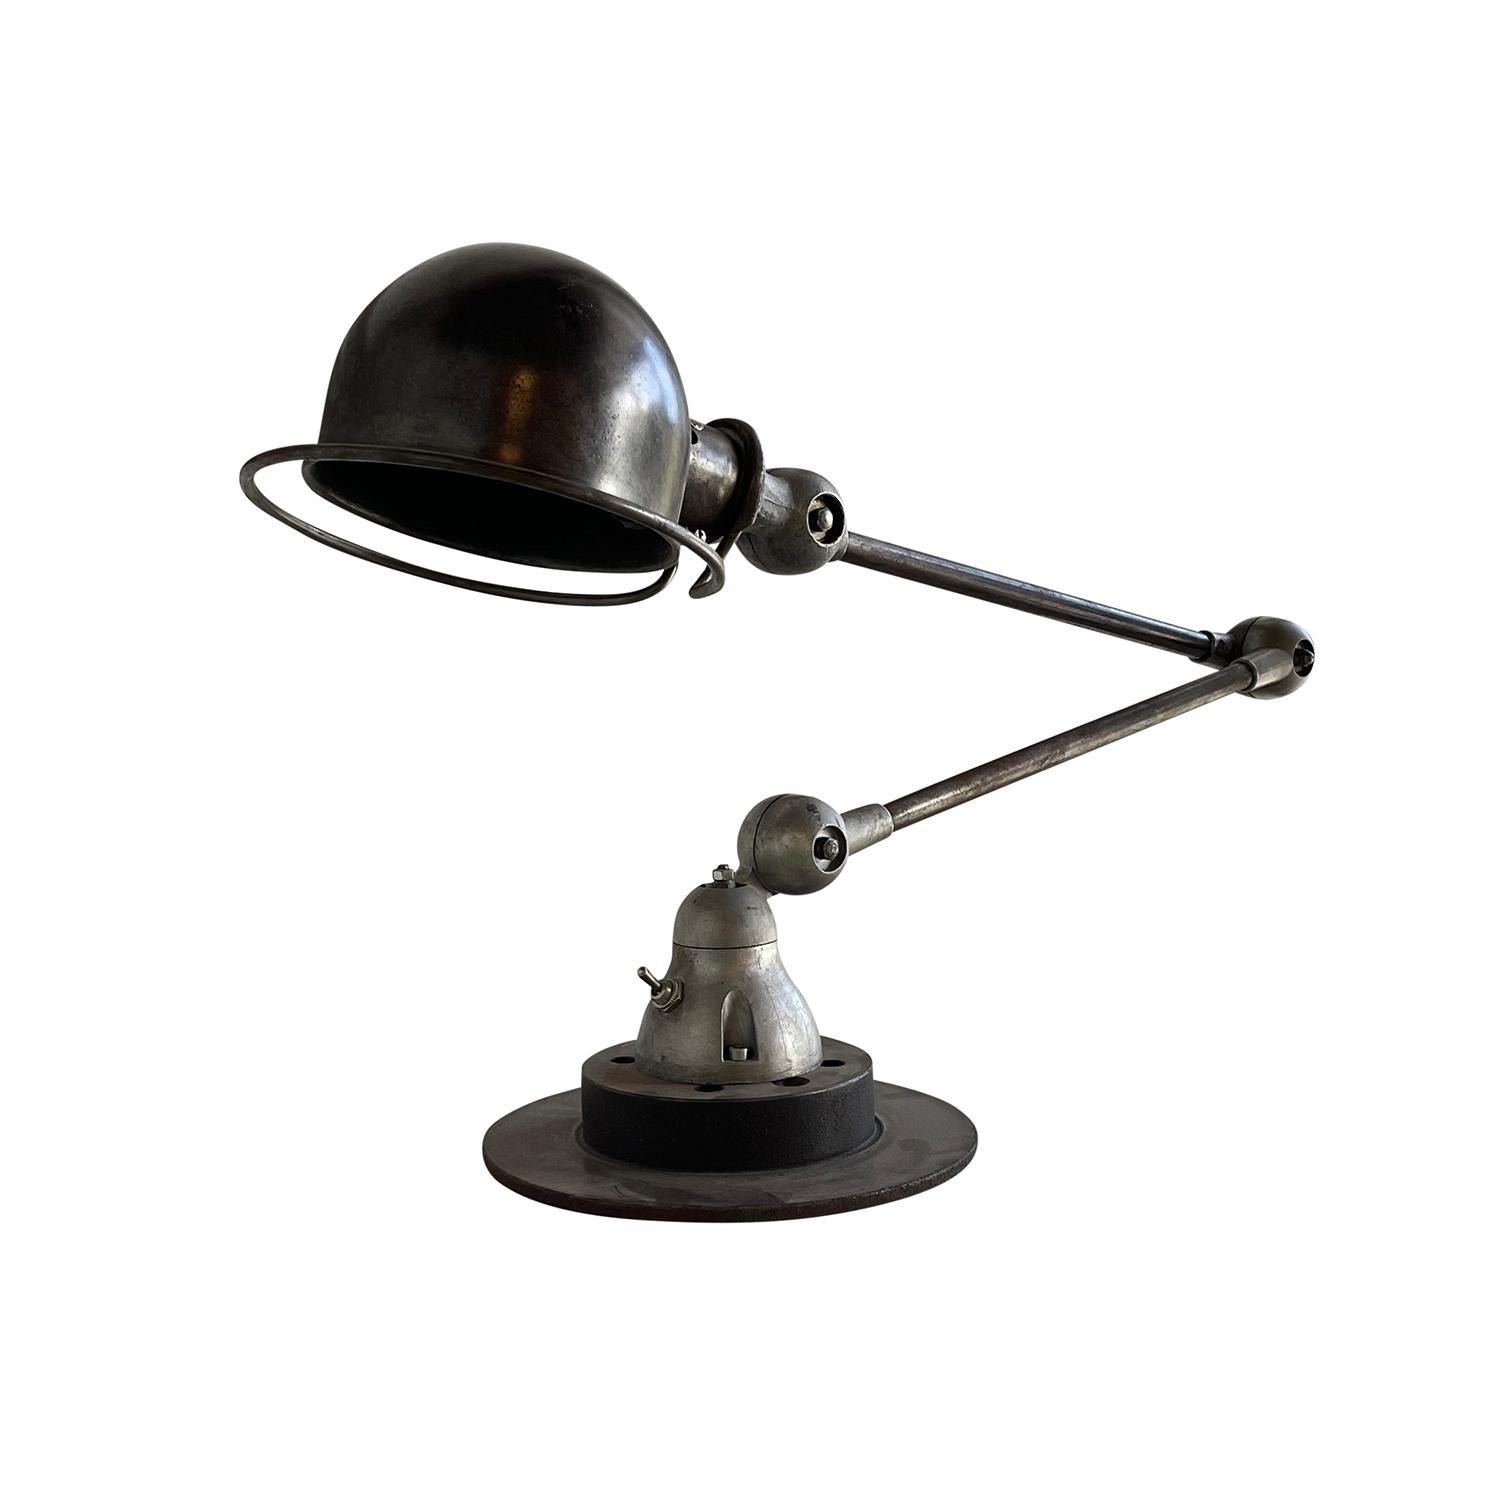 A dark-grey, vintage Mid-Century Modern French desk light made of hand crafted metal, designed by Jean Louis Domecq and produced by Jielde, in good condition. The industrial car brake, table lamp is composed with two adjustable arms, featuring a one